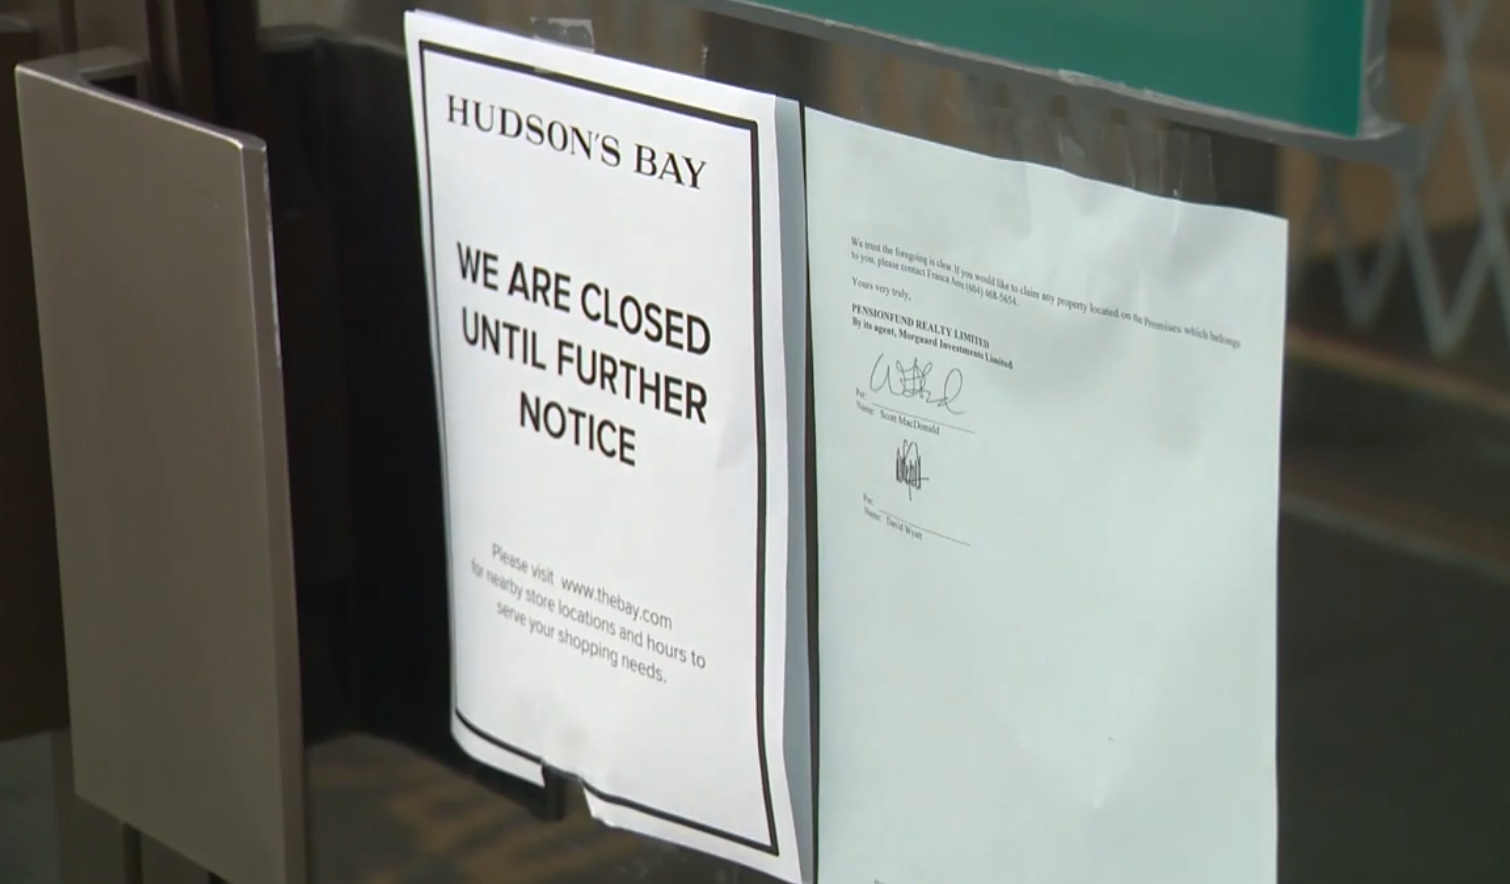 Hudson's Bay in Coquitlam shuttered, landlord says it defaulted on rent